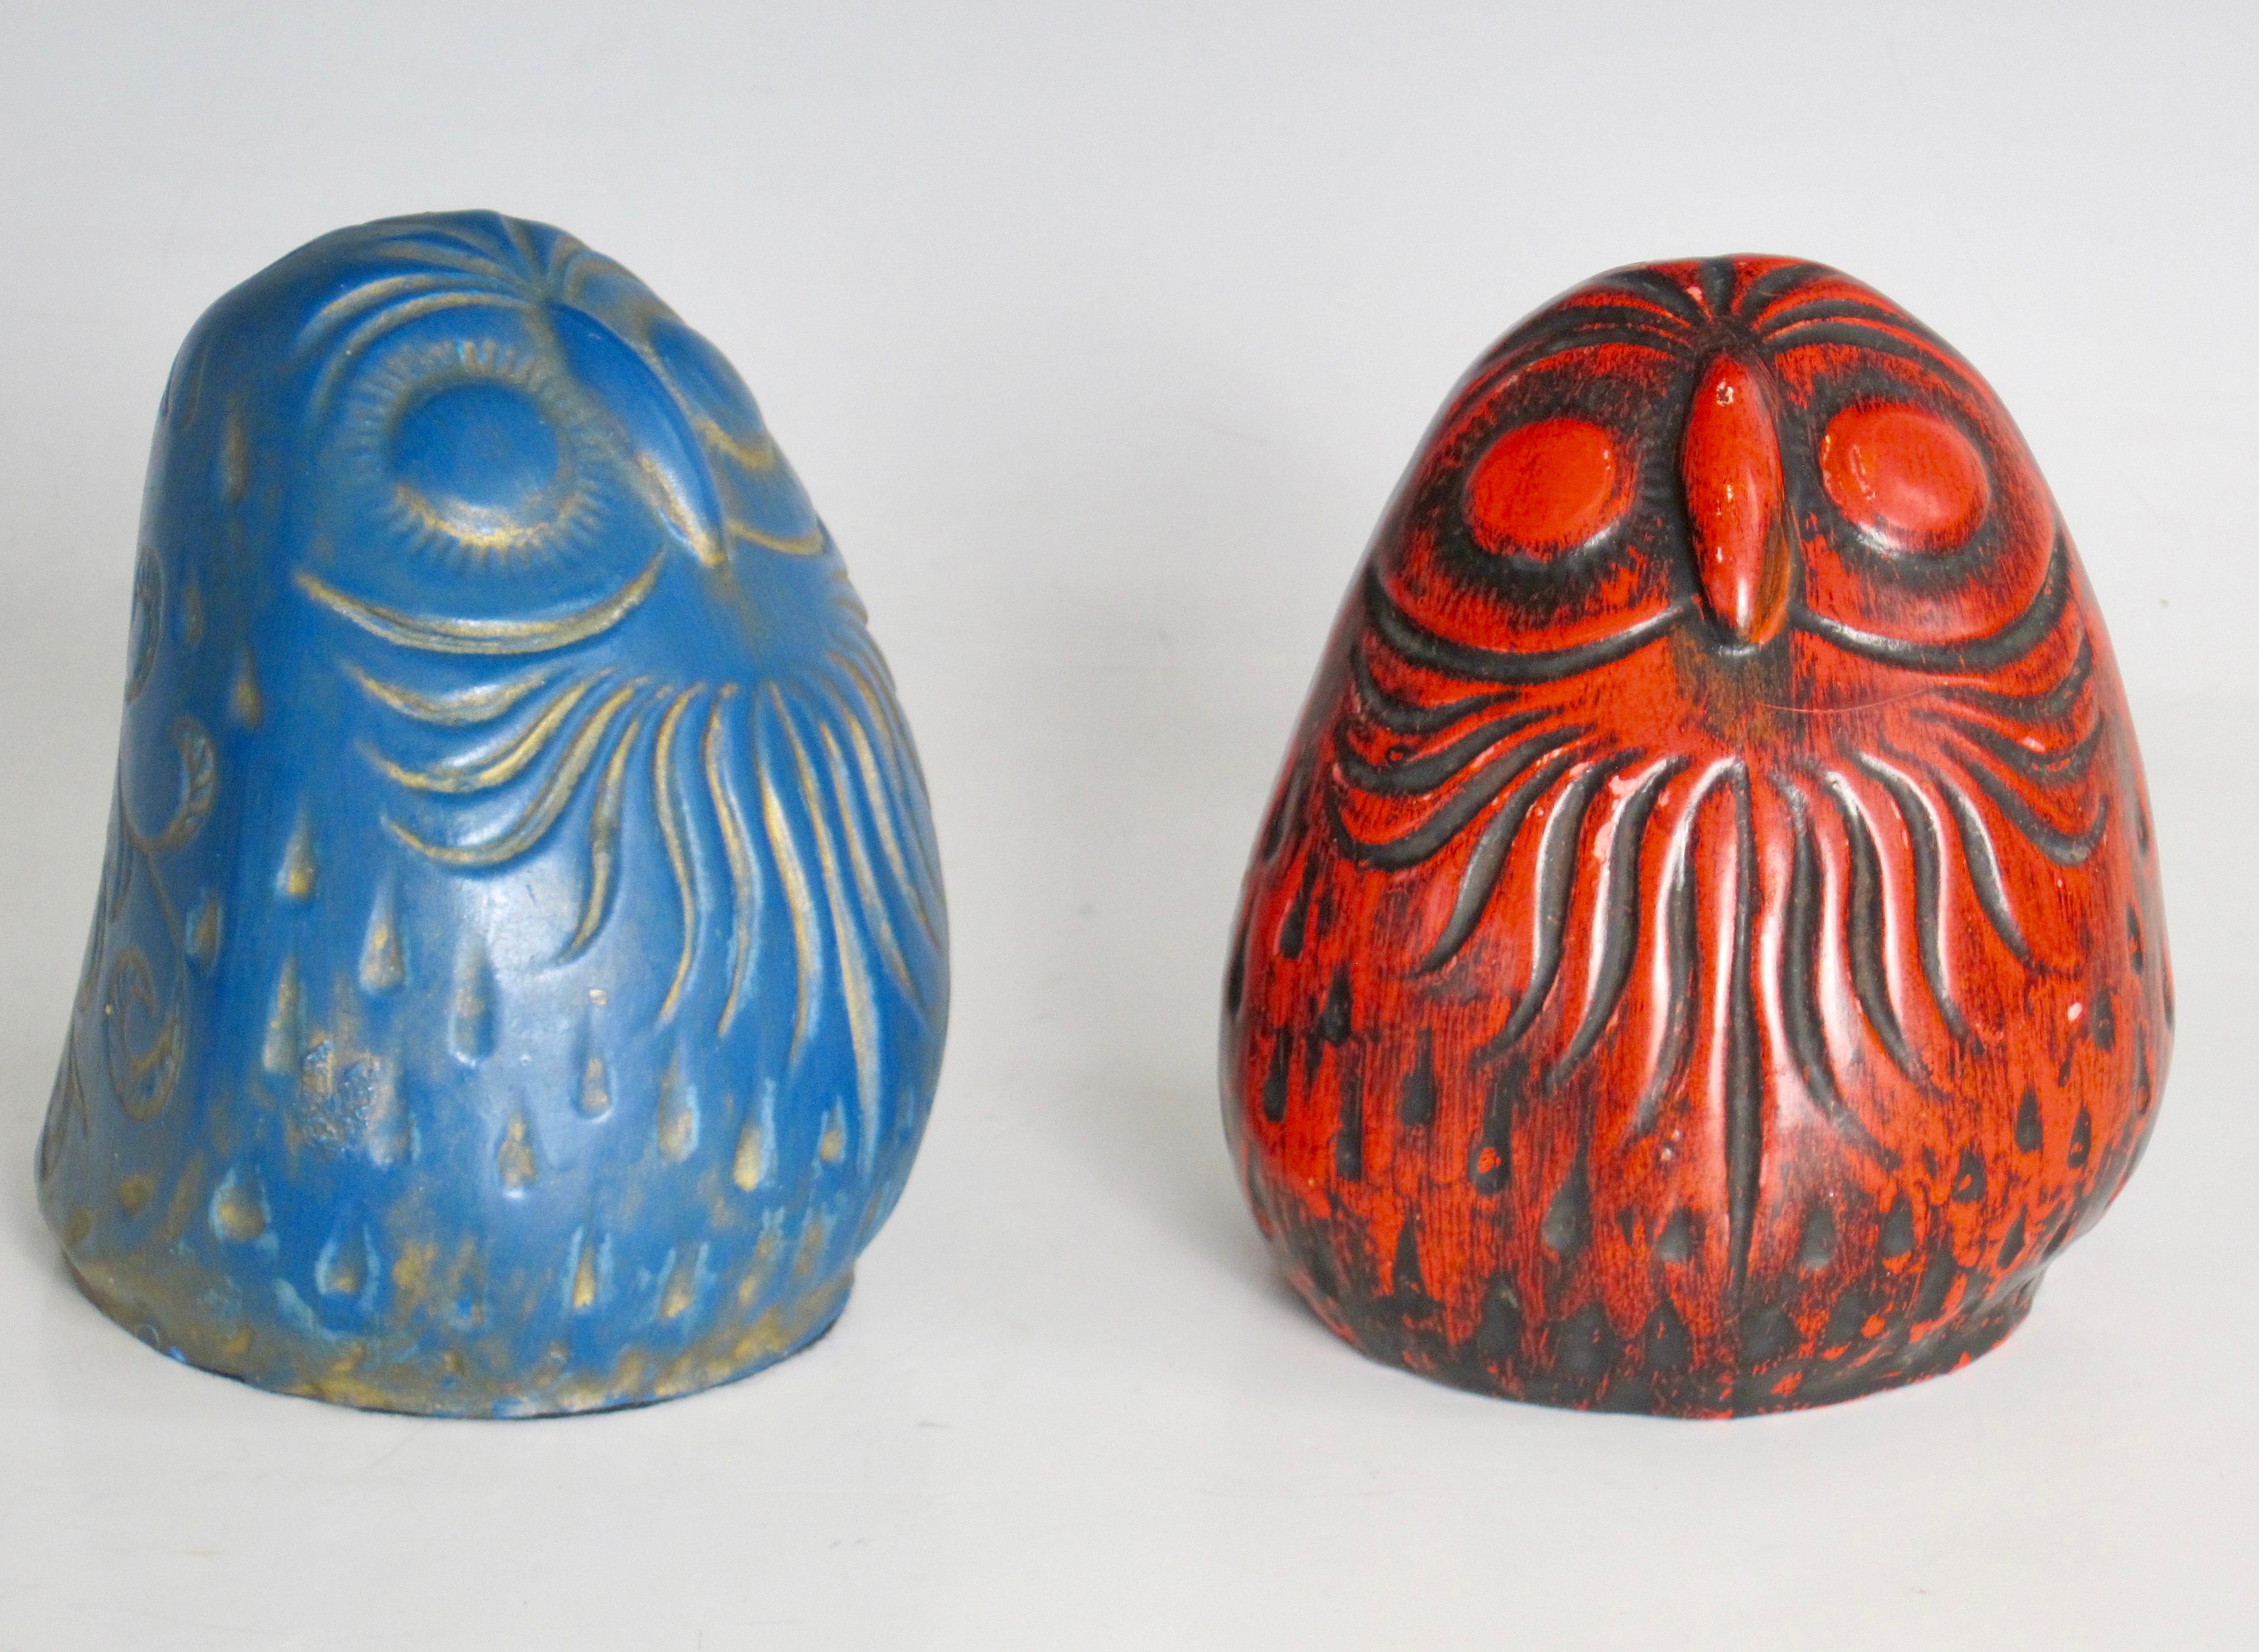 Pair of incised composite decorative owls from the early 1970s, one in red, the other blue. Add some vintage wisdom to you bookshelves with these this pair.